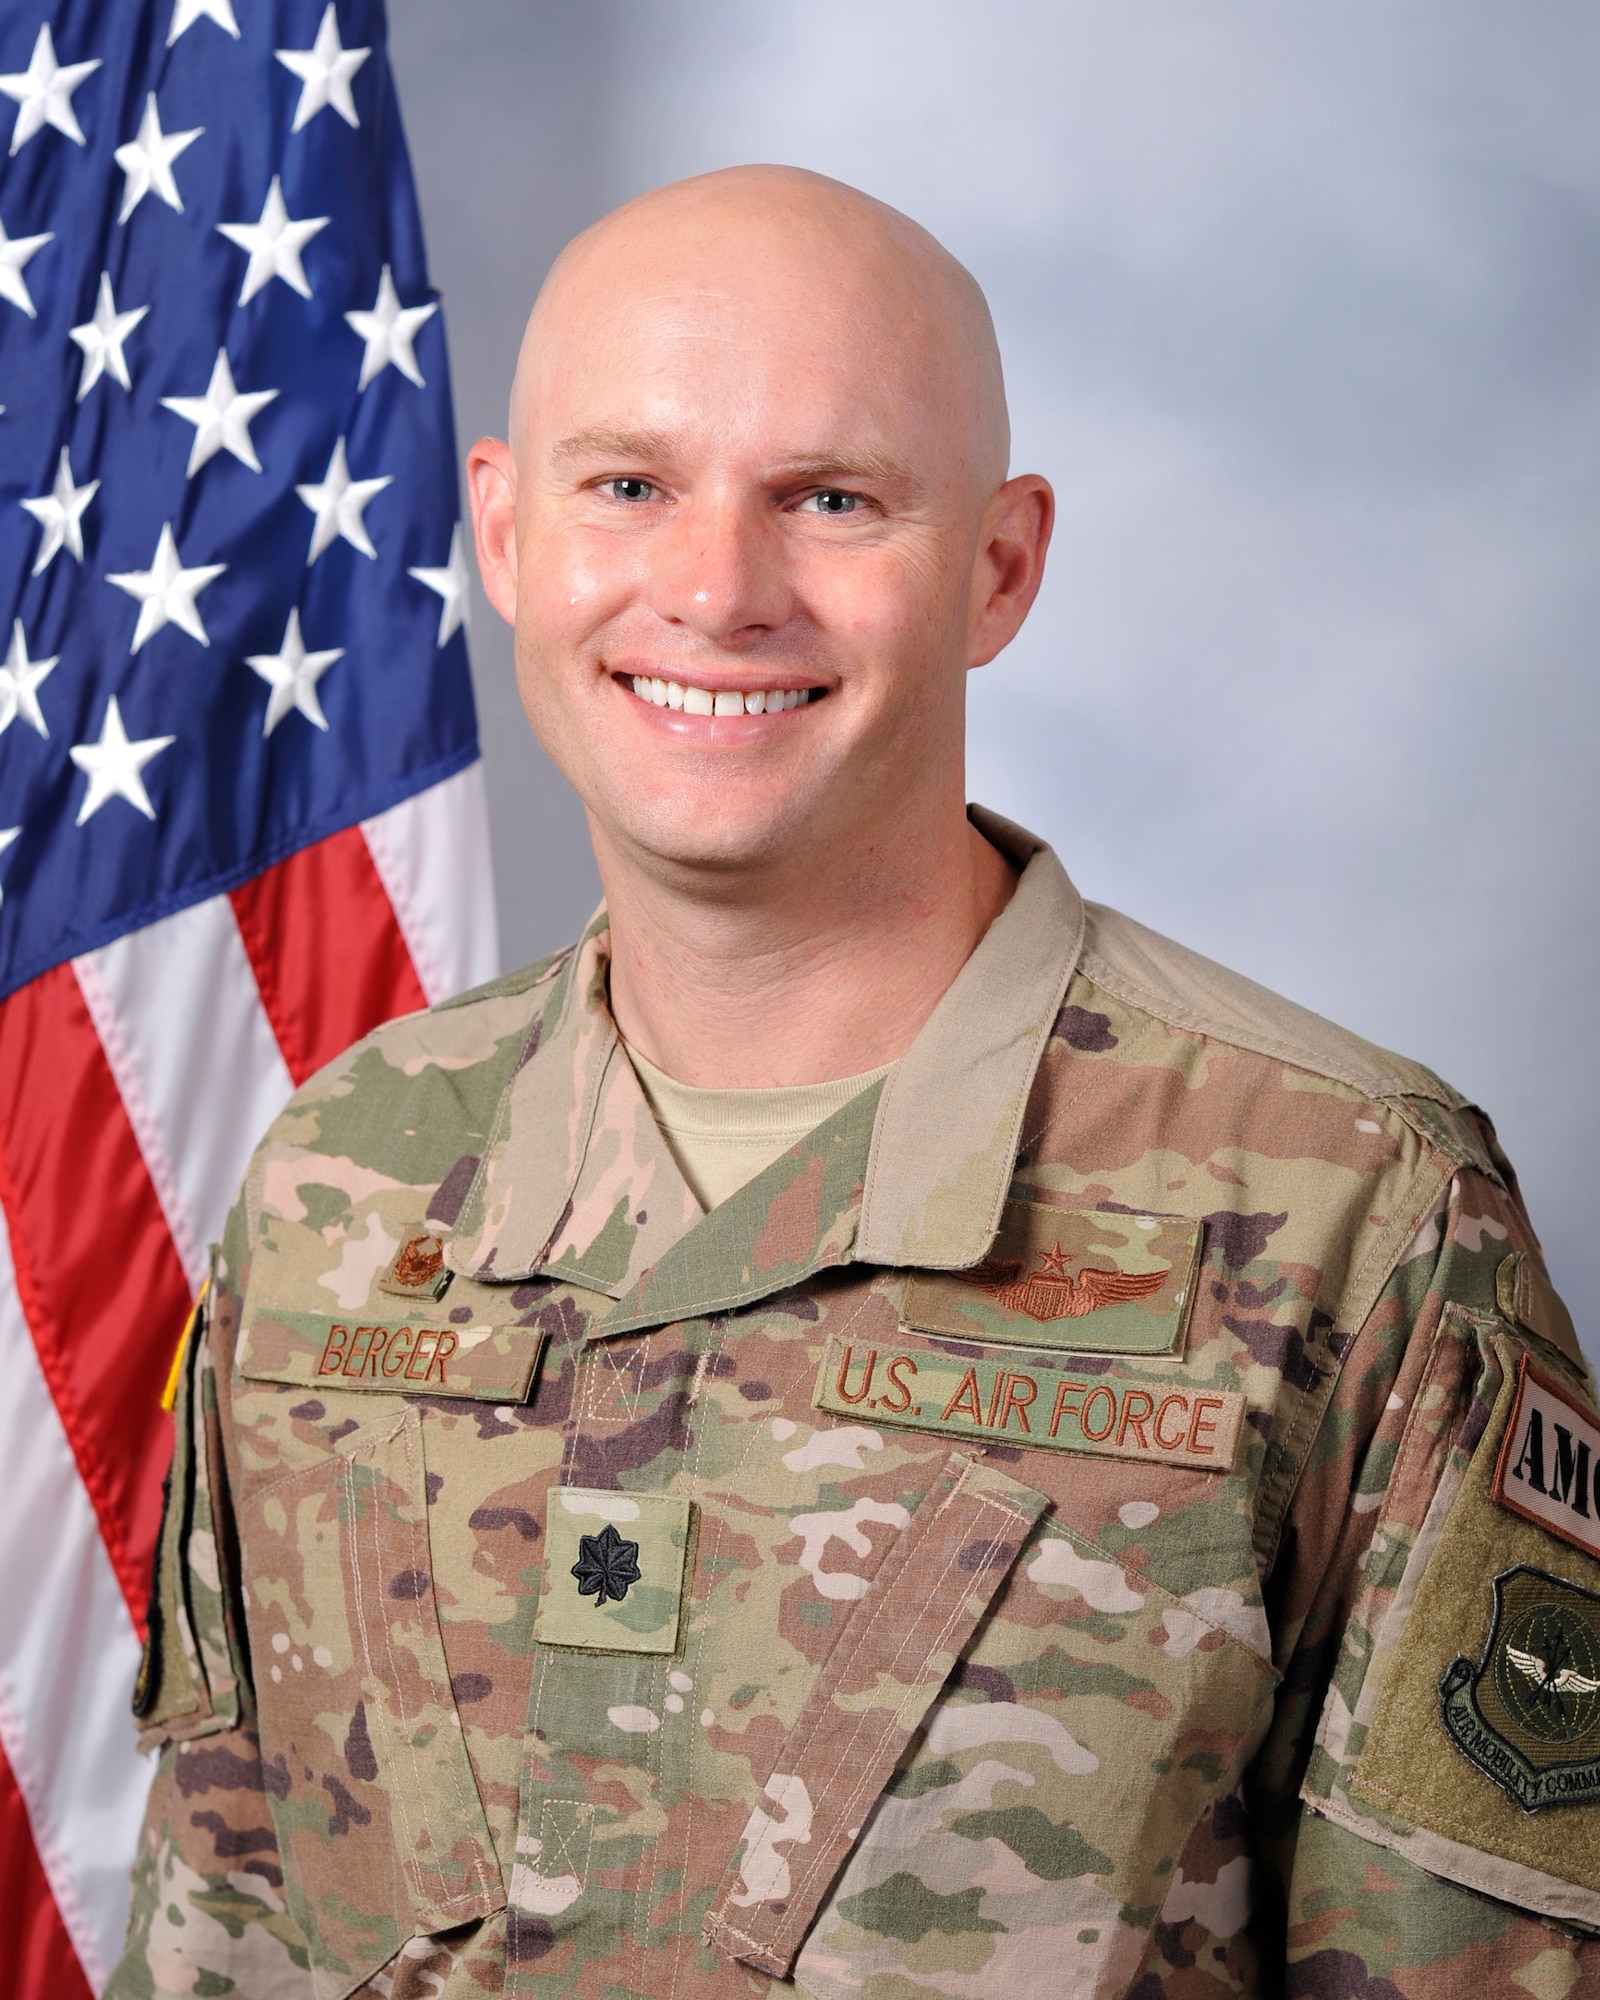 Lt. Col. John Berger, 321st Air Mobility Operations Squadron commander, shares some thoughts on the power of stories and the influence they can have. (Courtesy Photo)